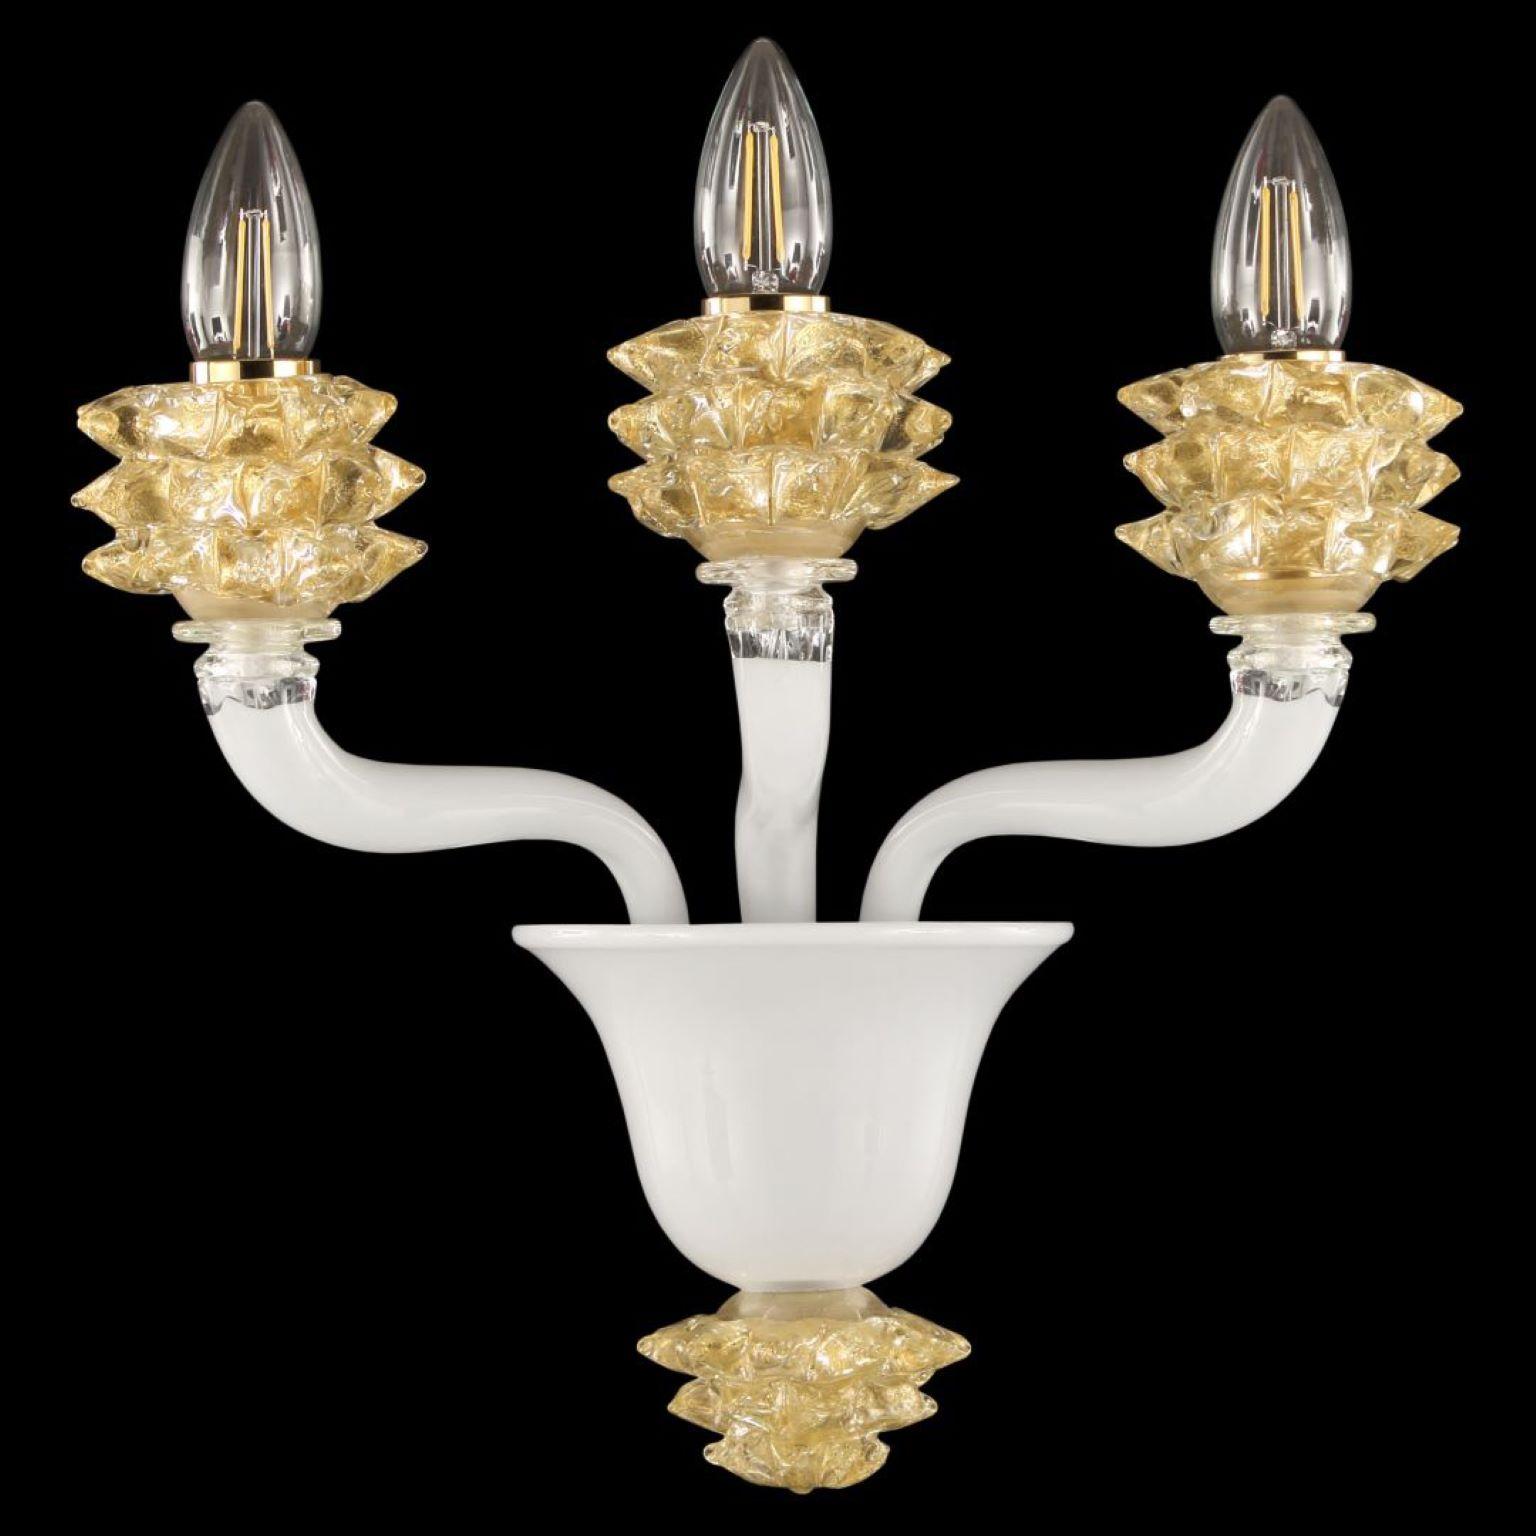 The Diamante sconce with 3 arms in white encased Murano glass and gold details is a well proportioned product.
The glass of the arms is smooth. The standout elements of this sconce are the cups, which are created using a complex manufacturing